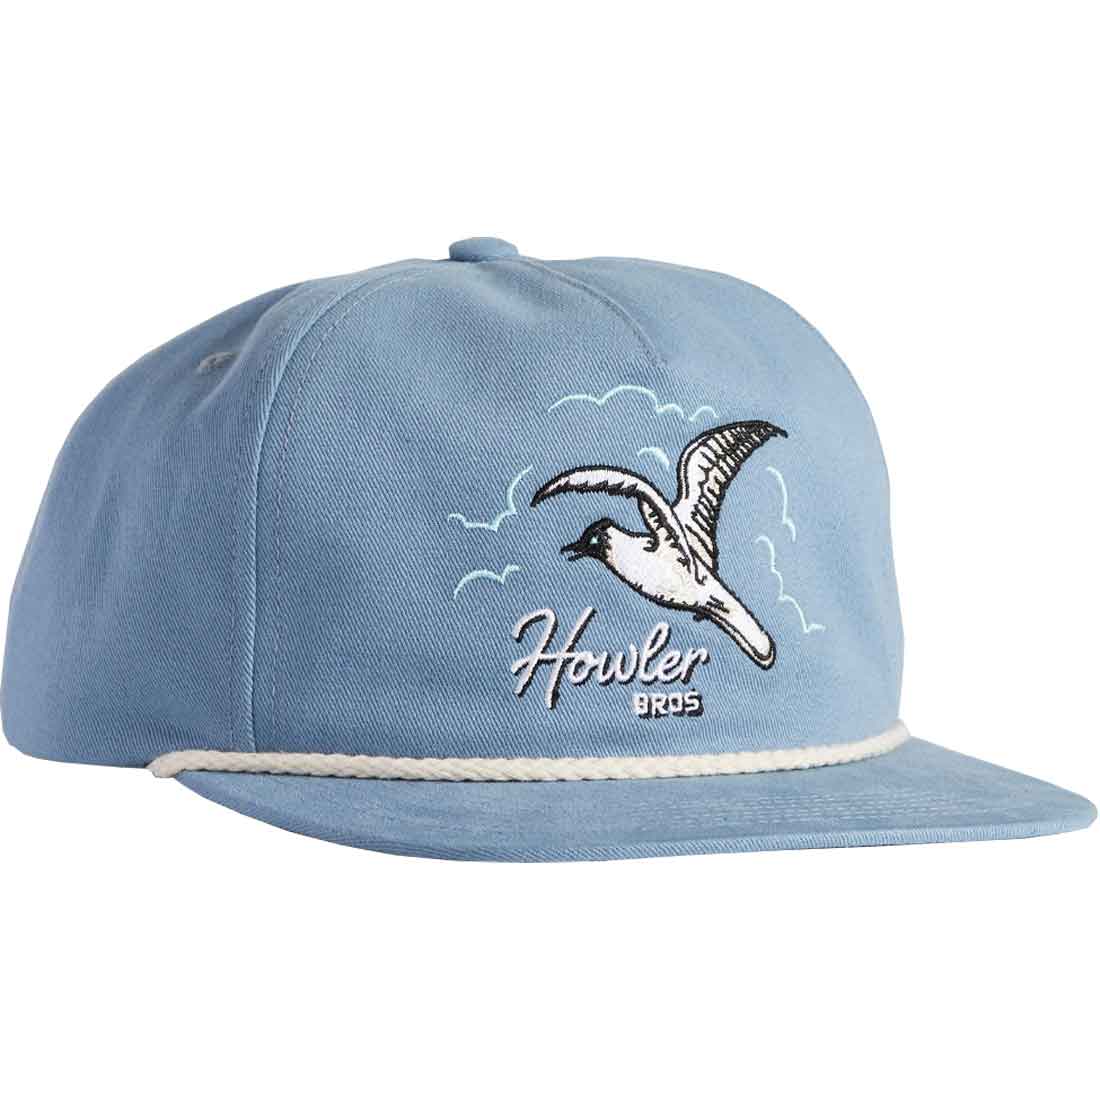 Howler Brothers Seagulls Exclusive Unstructured Snapback - Men's